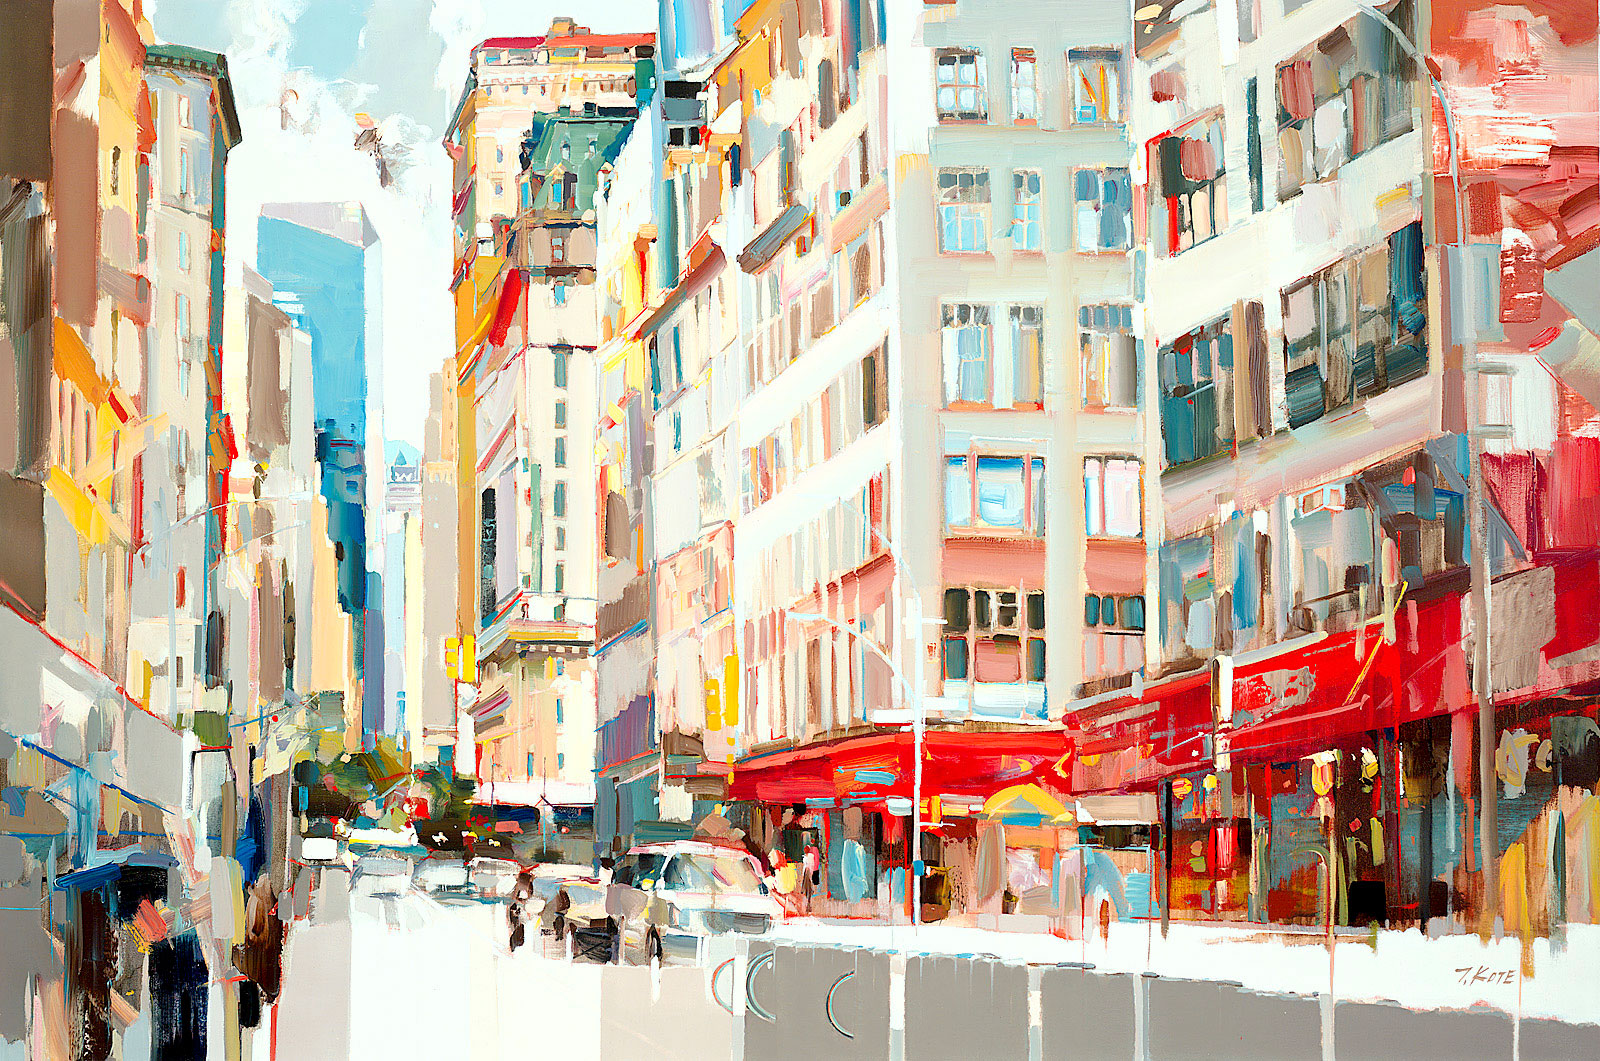 Josef Kote - There Is Light, I Can See It